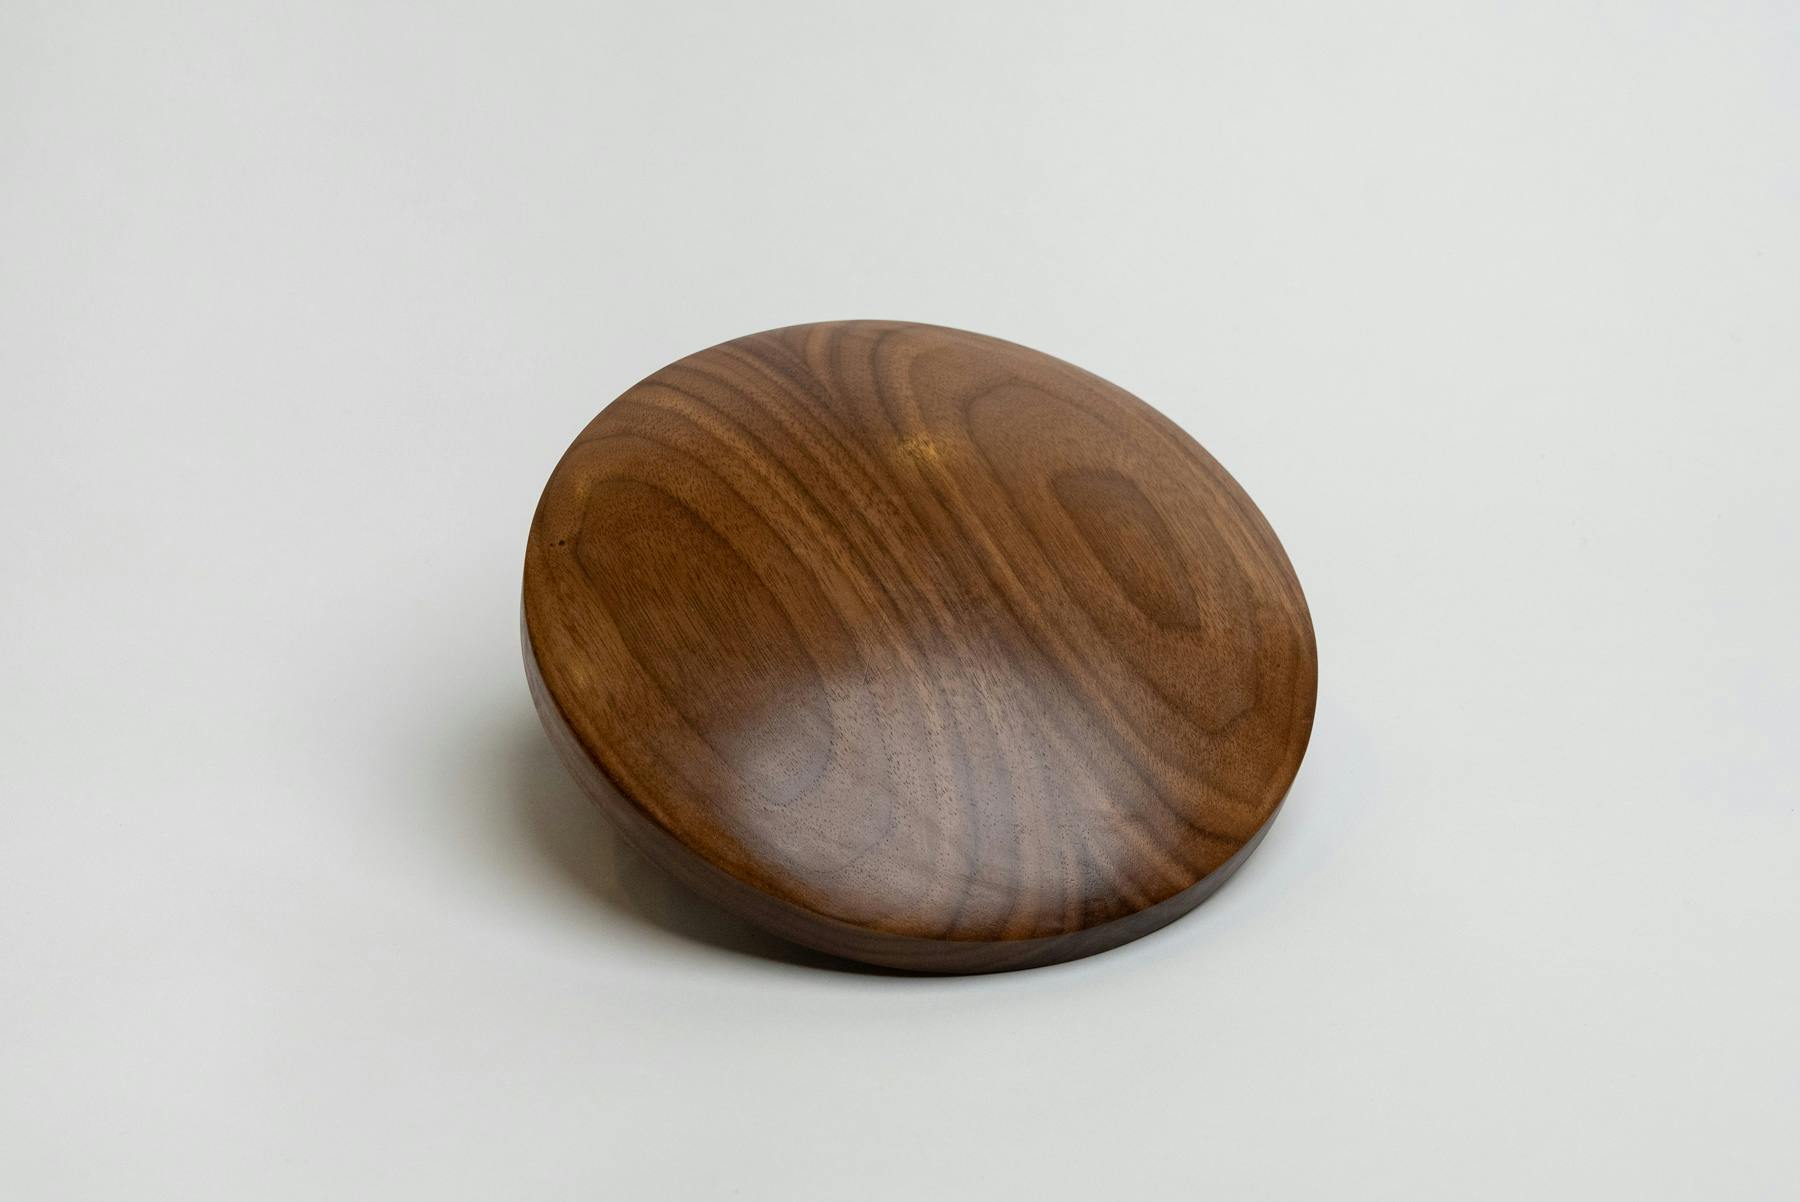 A thin, walnut saucer with both the top and bottom bulging outward. Its surface is smooth, showing faint reflections of the studio lights around it.